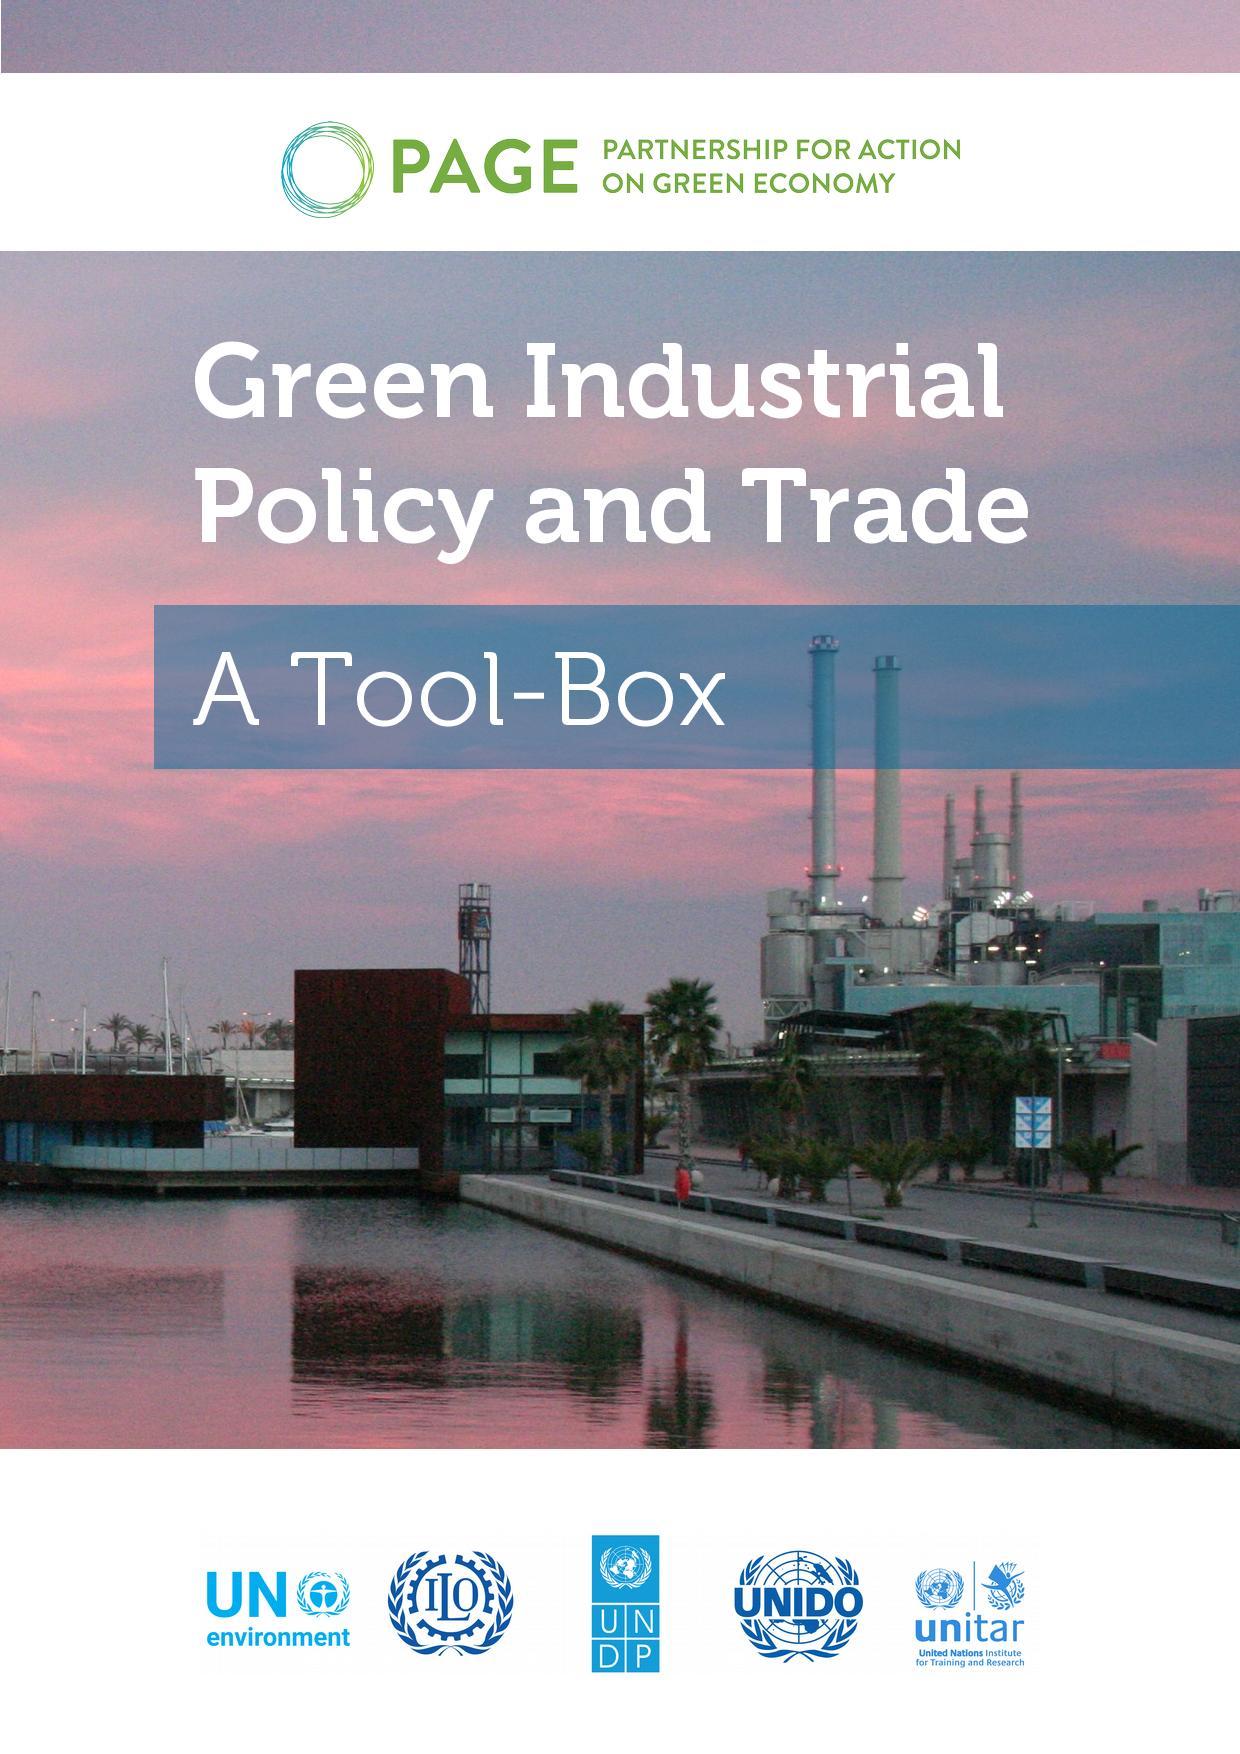 C-EENRG Fellows shape guidance on green industrial policy and trade